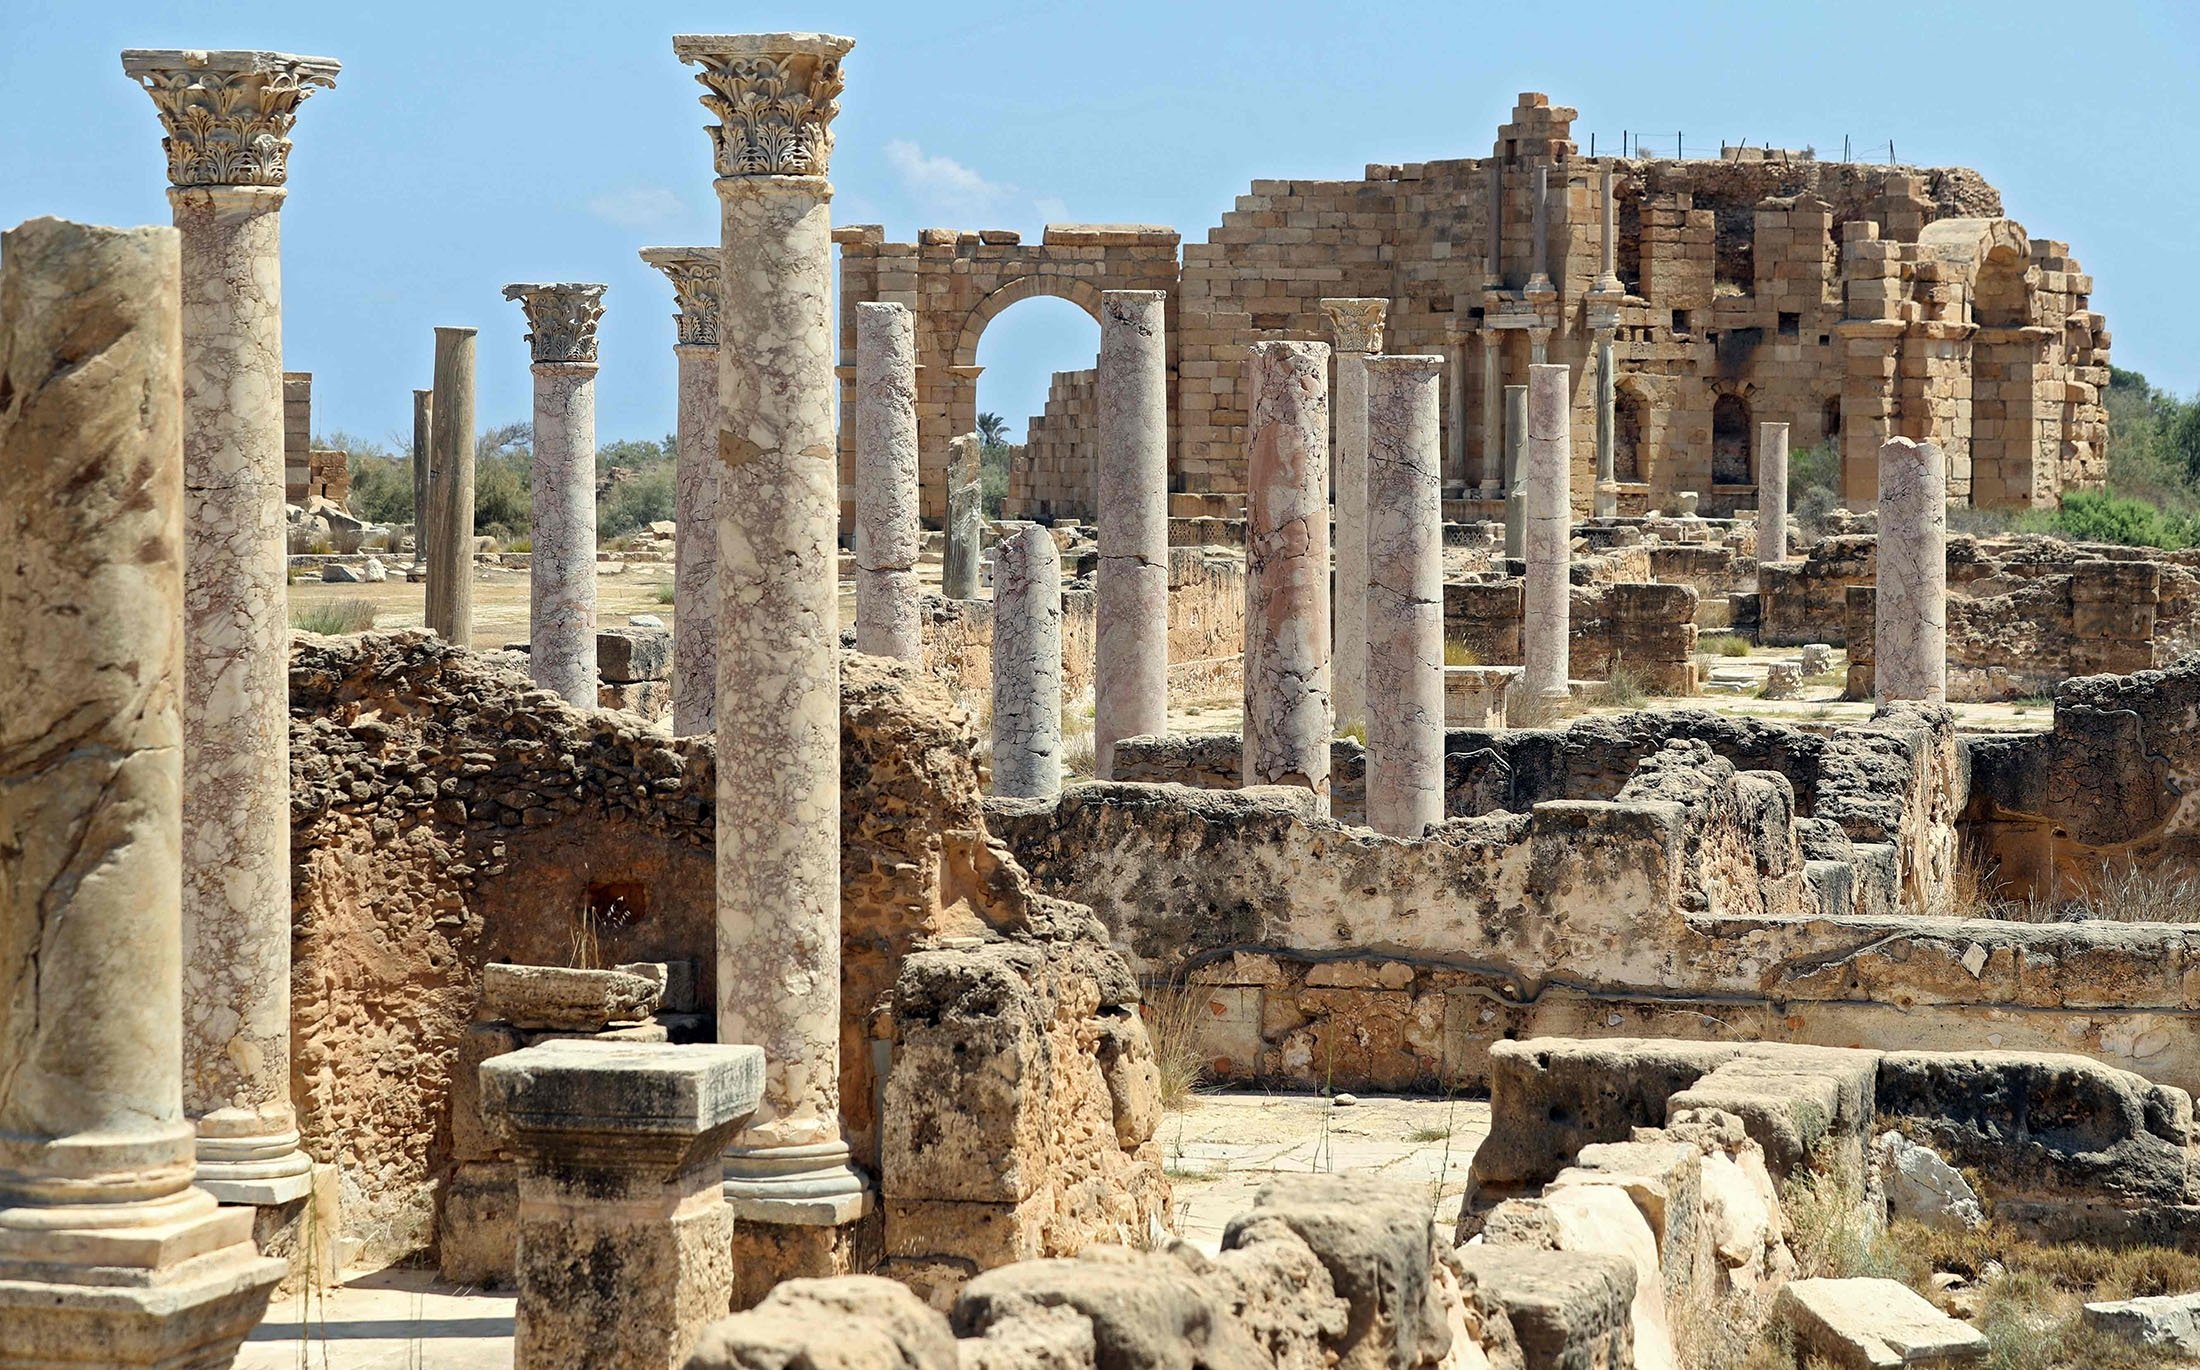 A general view of marble columns looking towards the Nymphaeum in the background, in the ancient Roman city of Leptis Magna near the coastal city of al-Khums, Libya, Aug. 24, 2021. (AFP Photo)